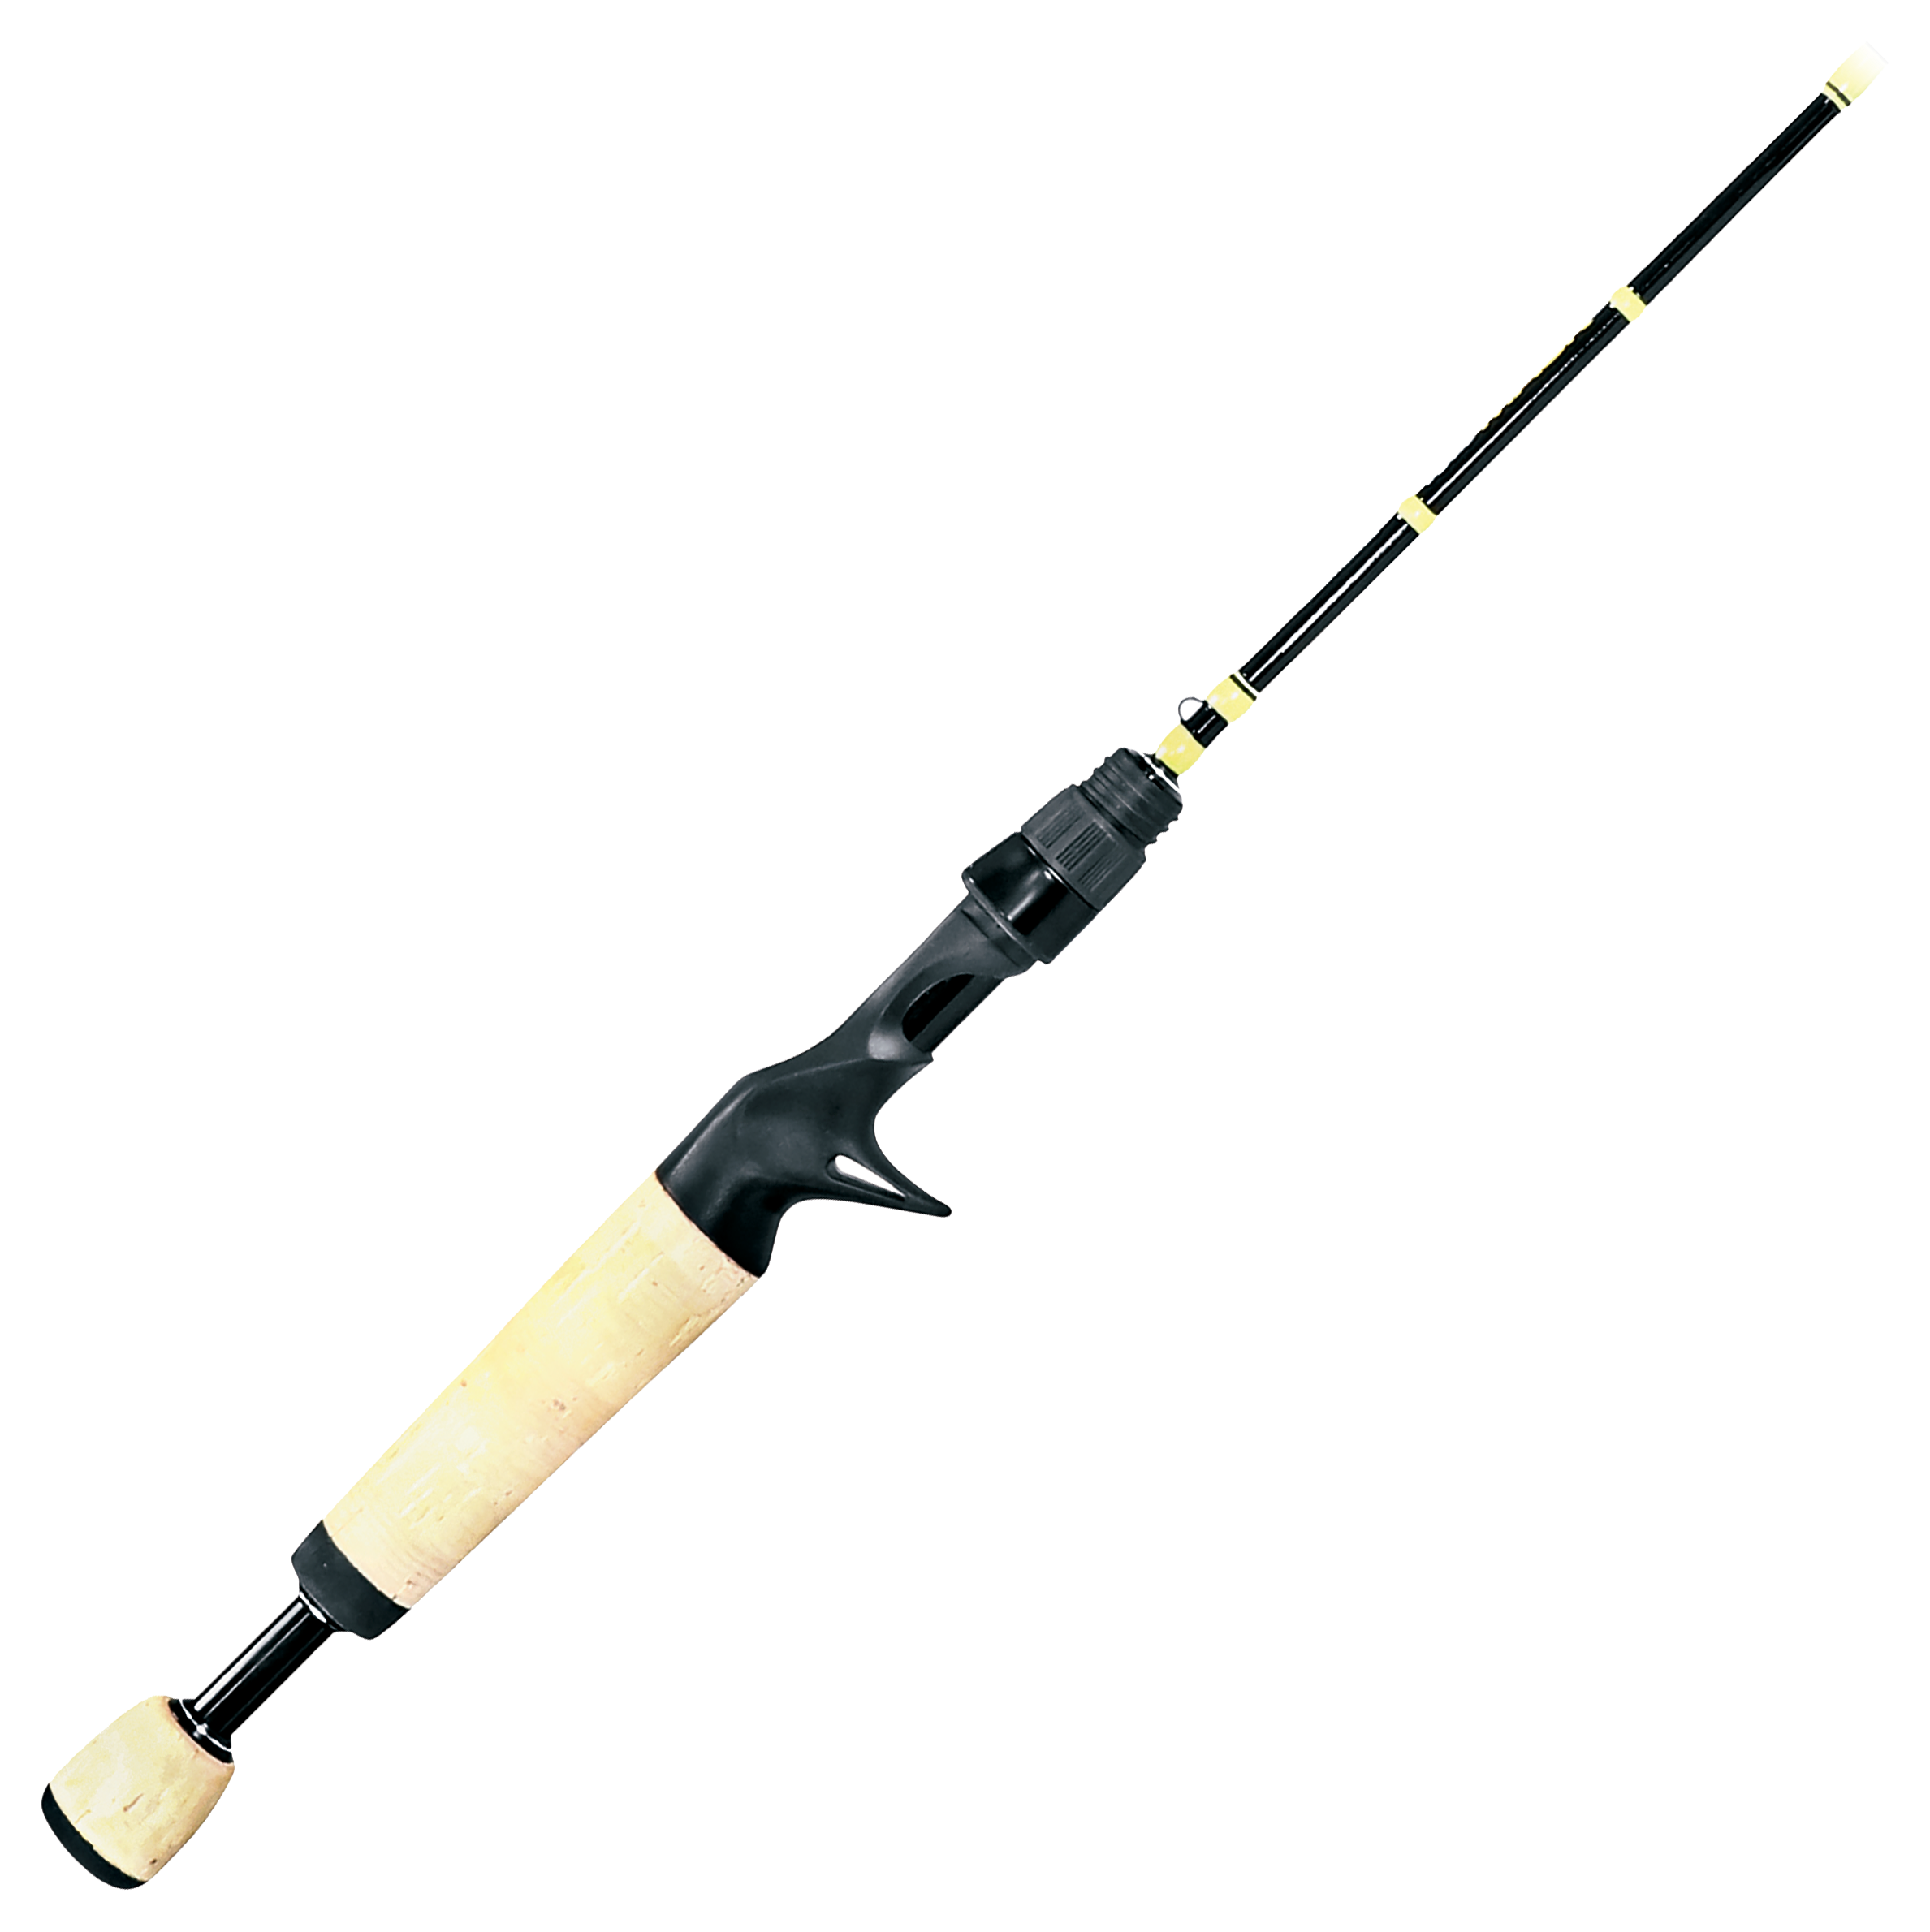 13 Fishing Tickle Stick Carbon Pro Ice Fishing Rod – Fishing Online